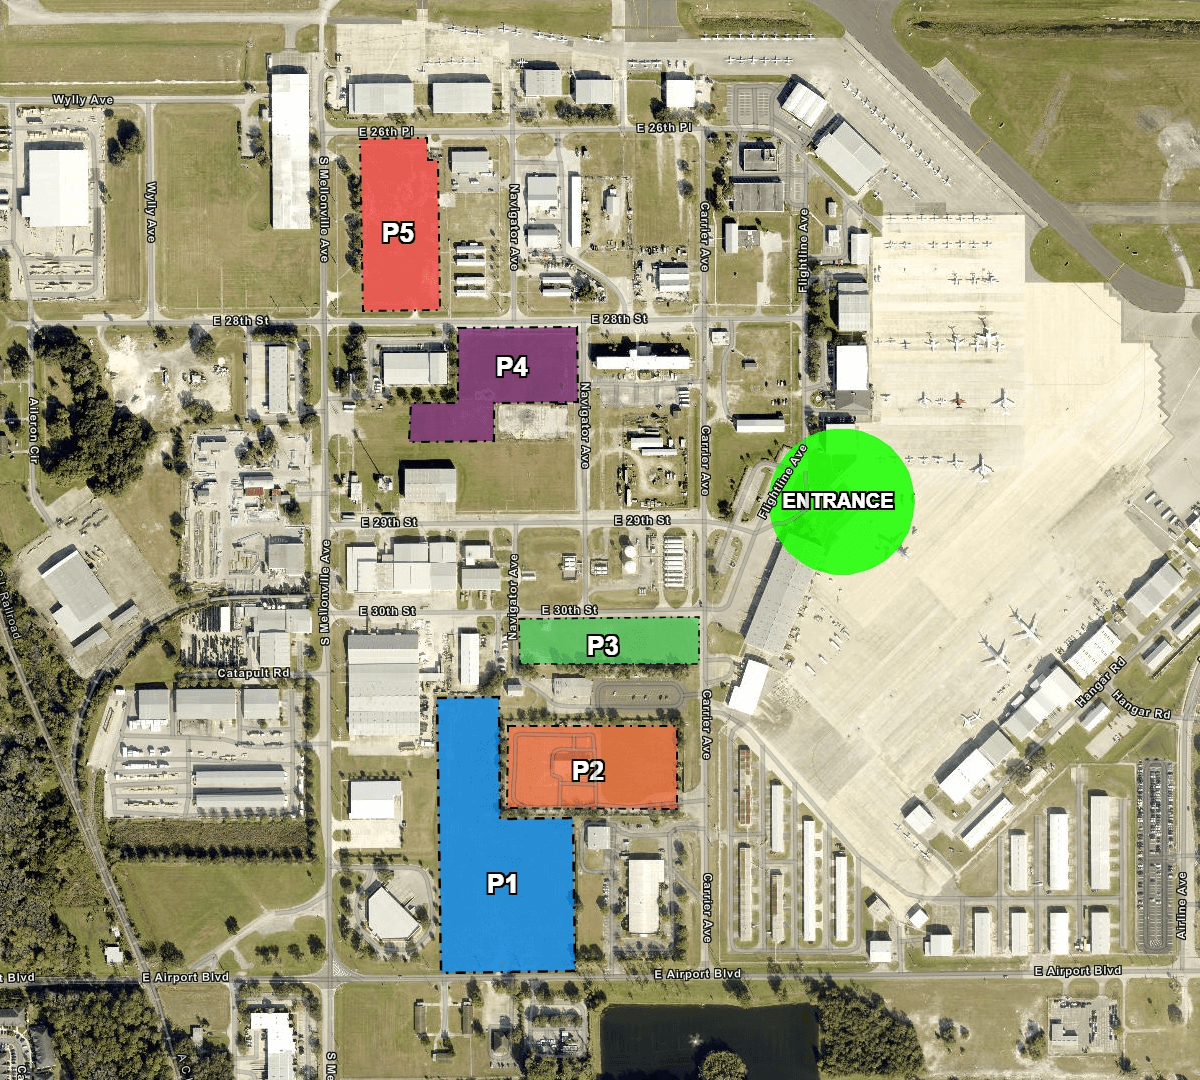 Aviation Day Parking Layout